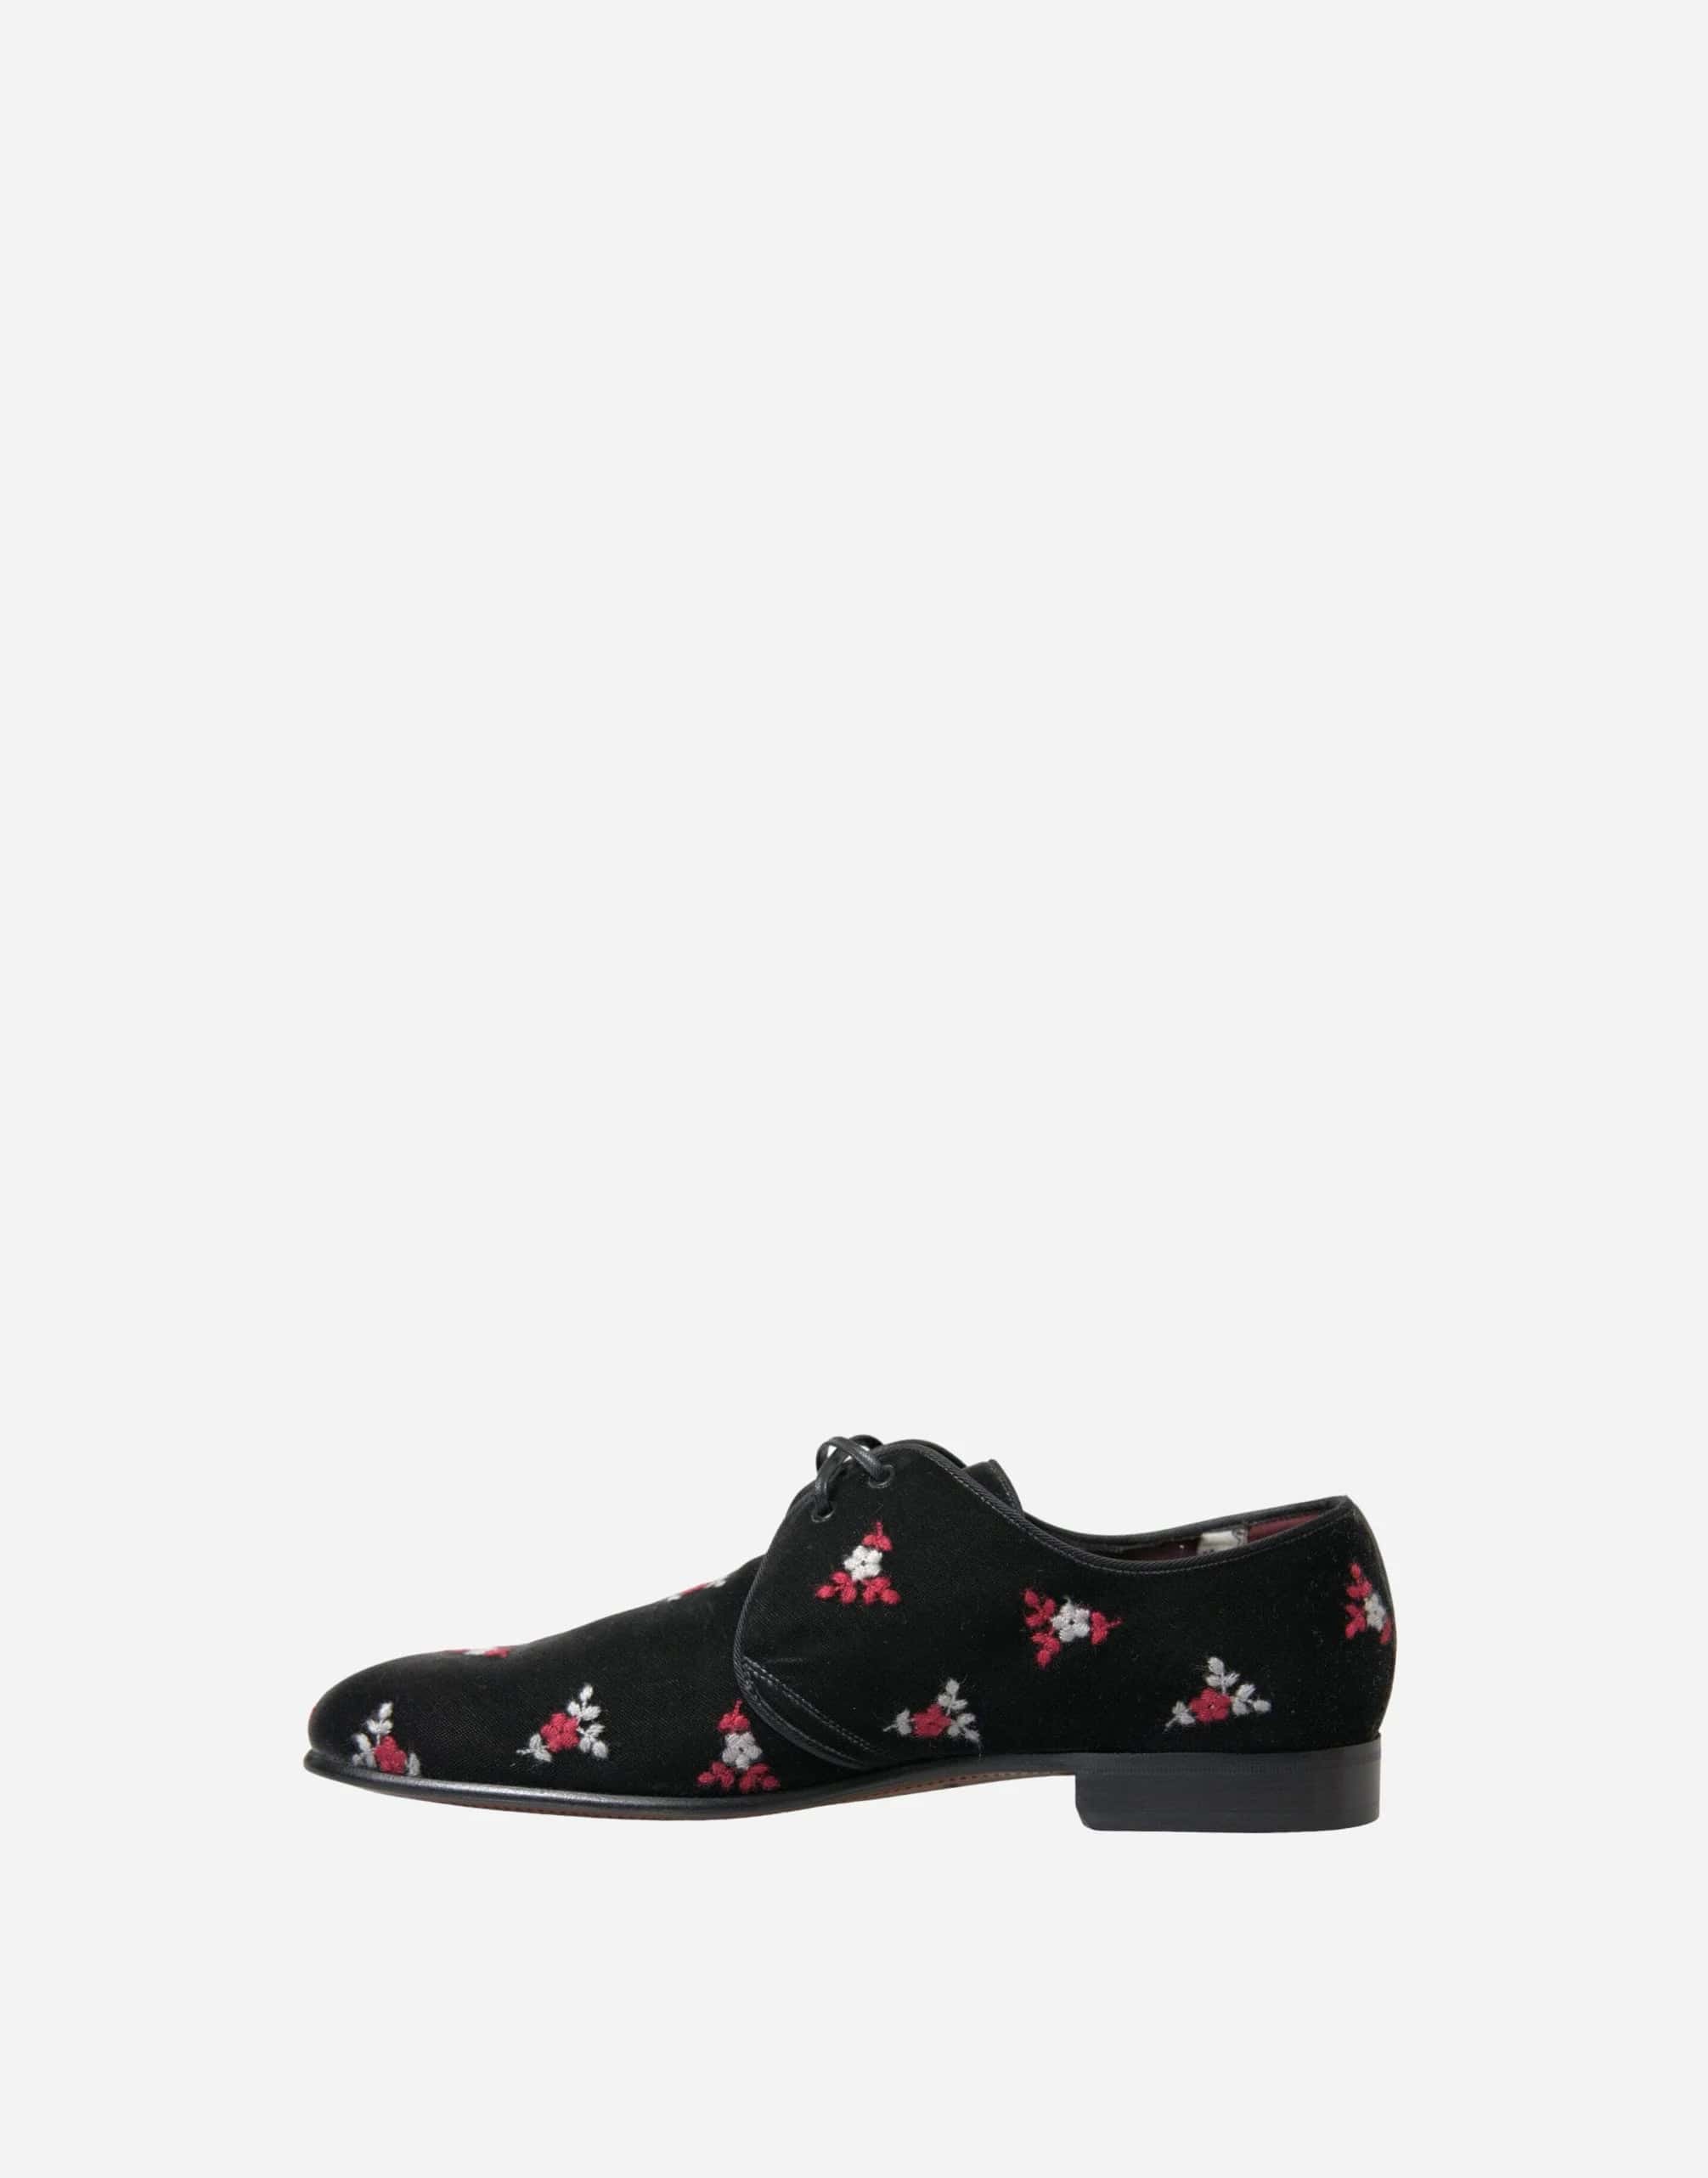 Floral Embroidery Dress Shoes